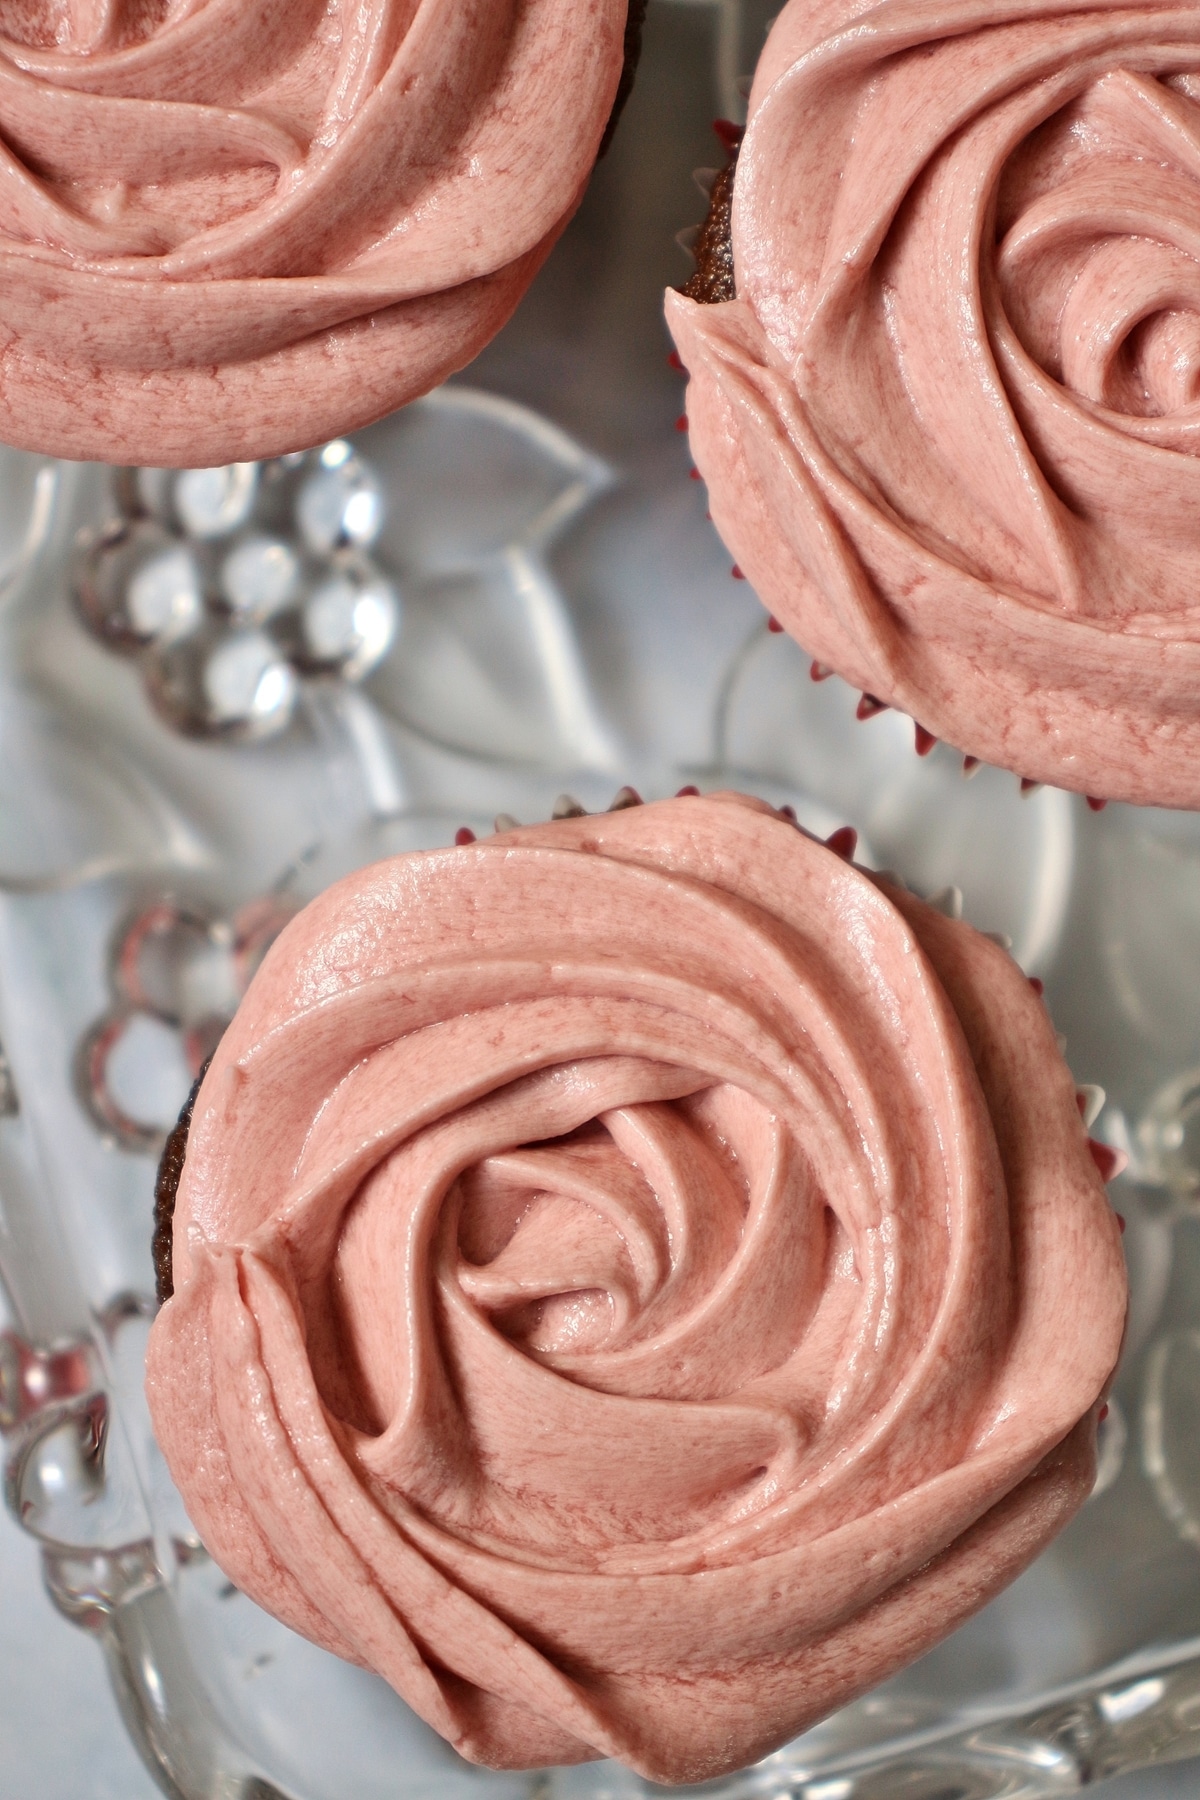 overhead view of 3 cupcakes with pink frosting that looks like a rose